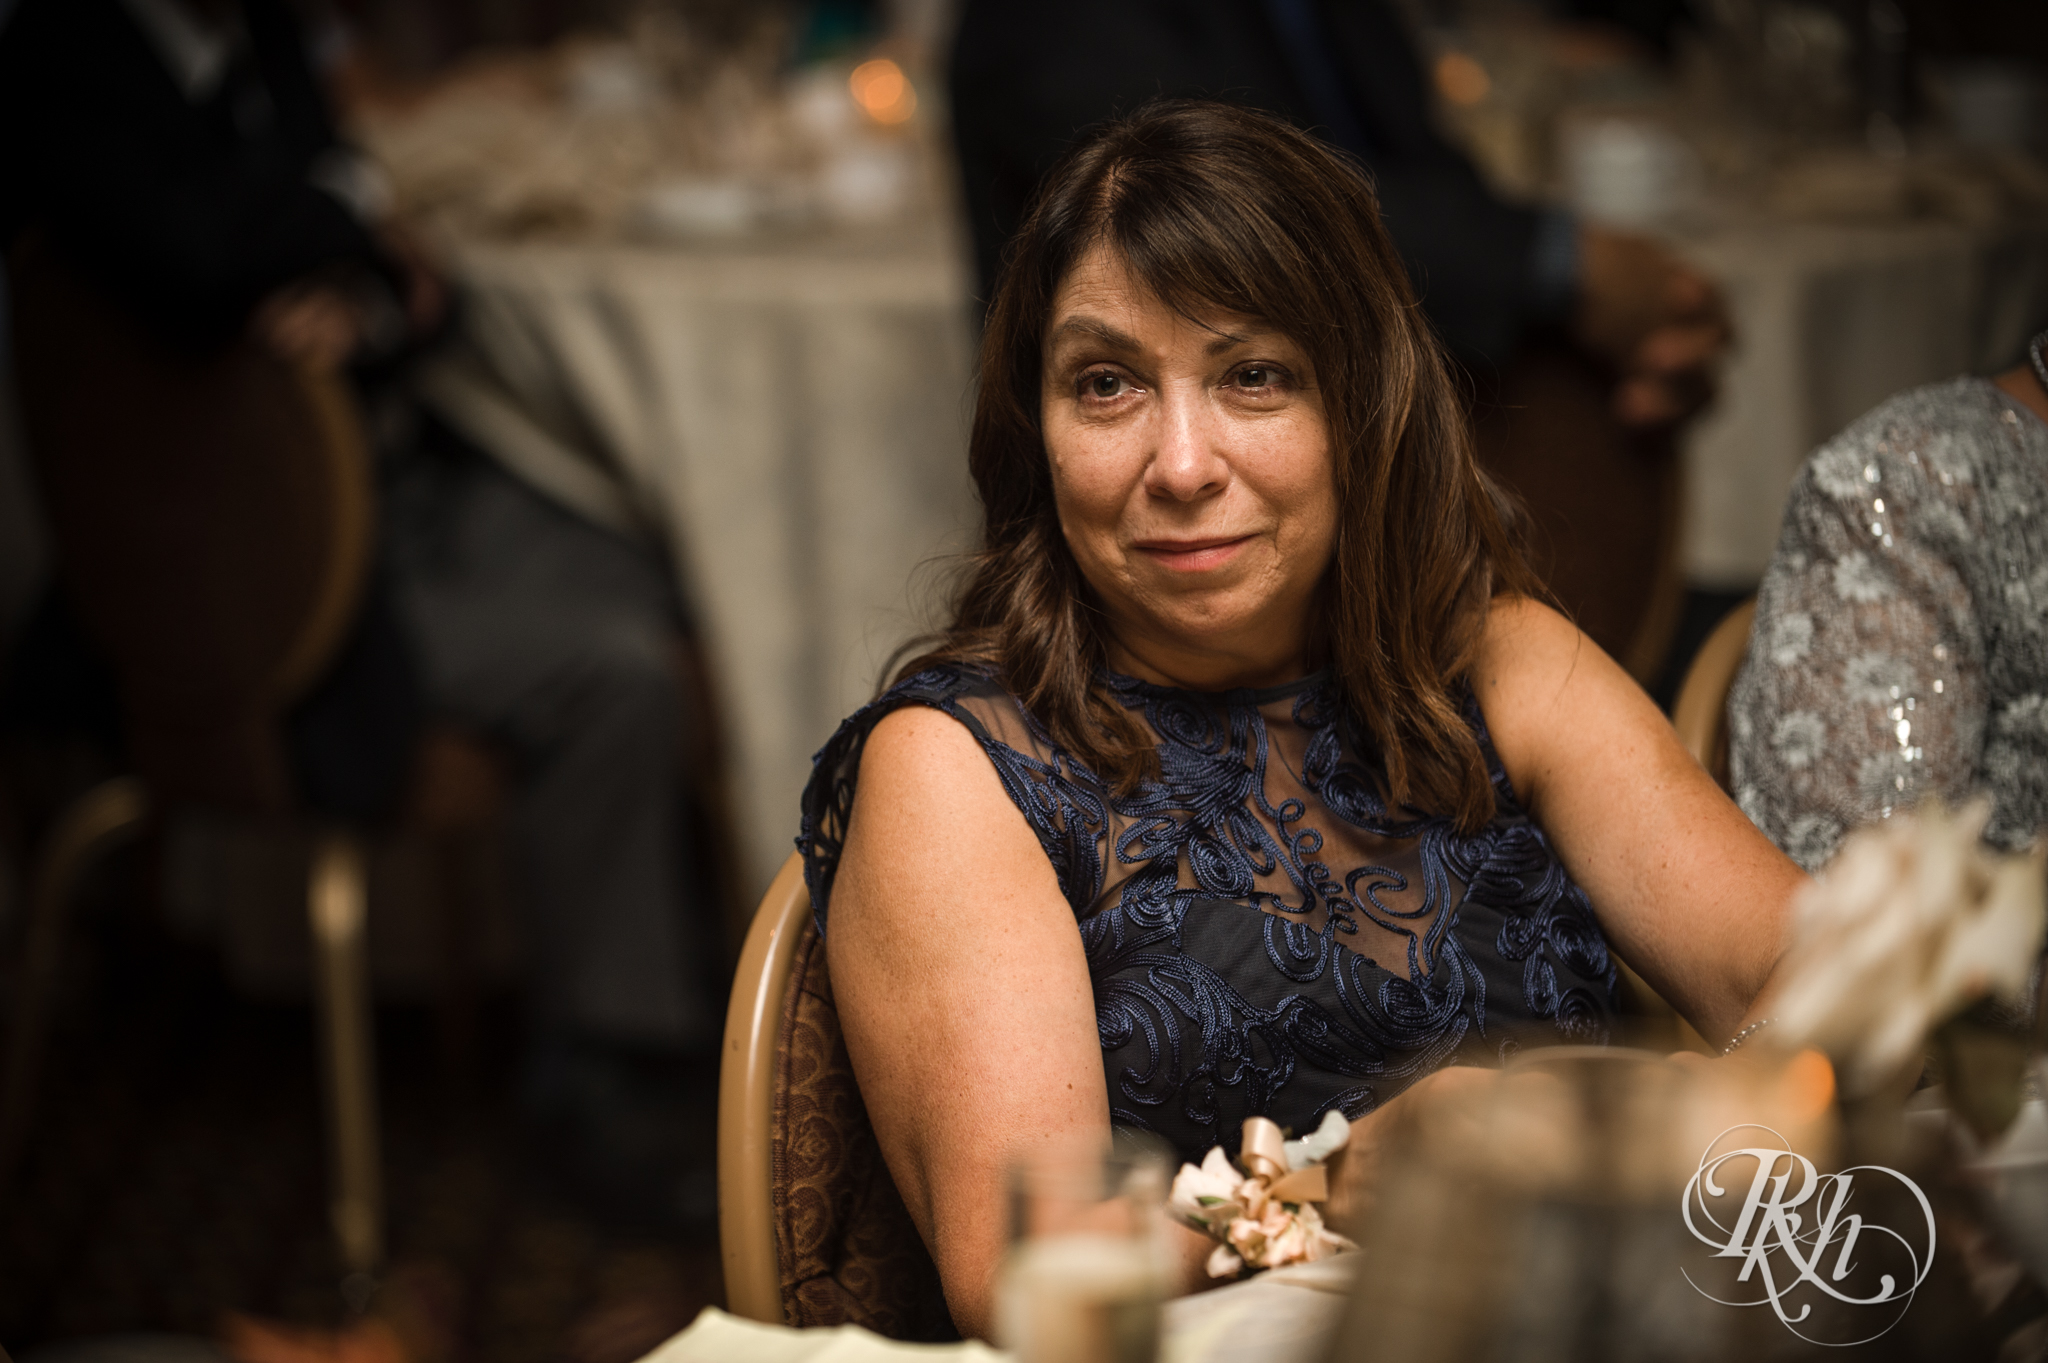 Mother of bride smiles during wedding reception at the Saint Paul Hotel in Saint Paul, Minnesota.